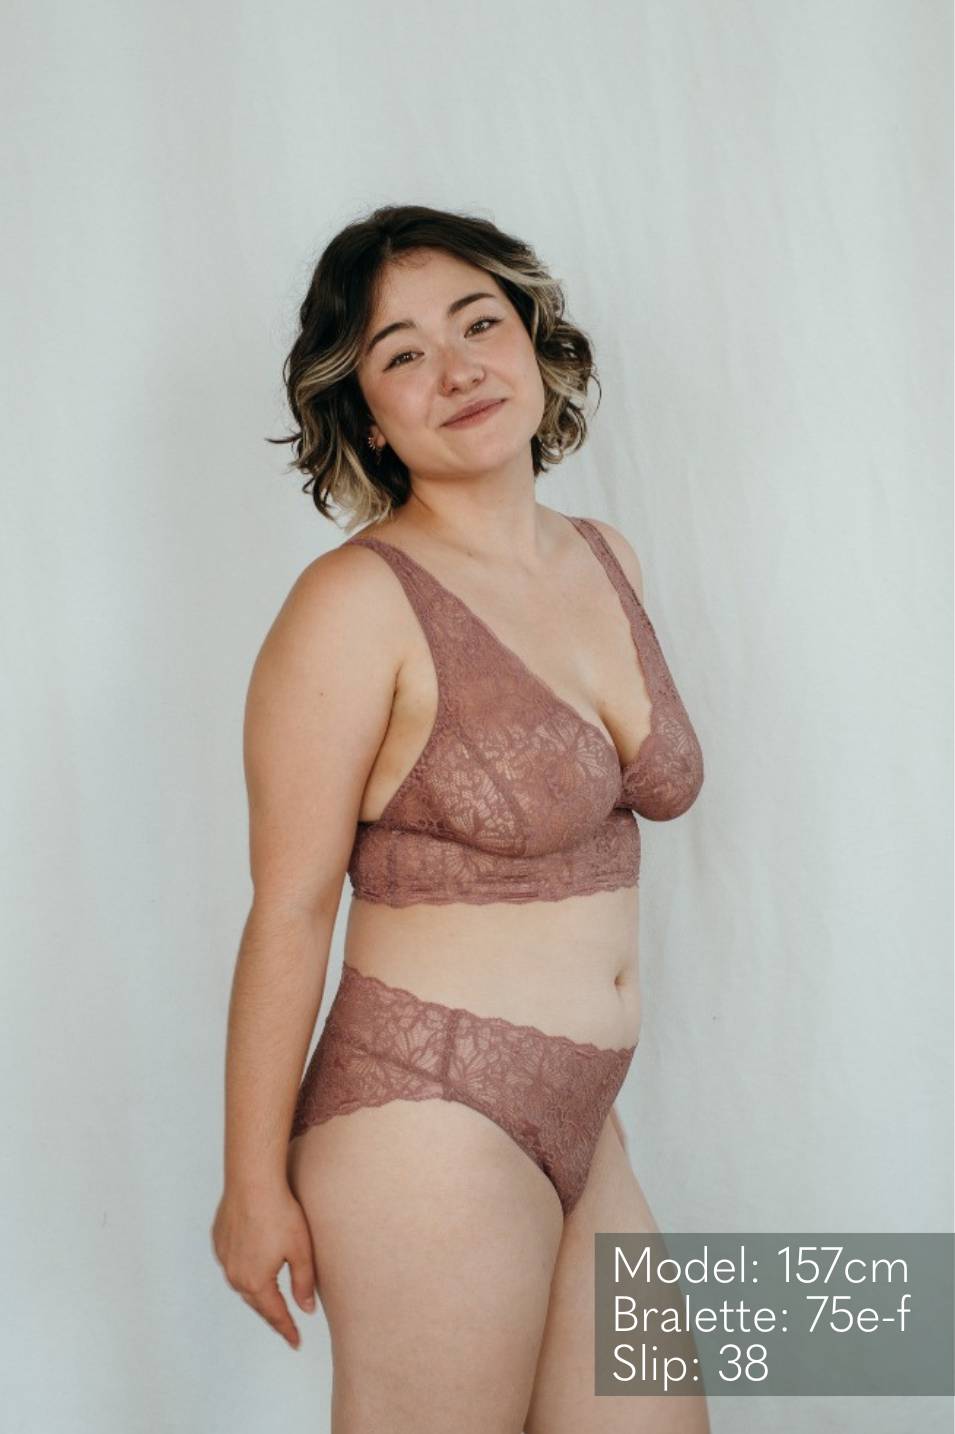 Finest lace in smockey rose on model, photographed from the side